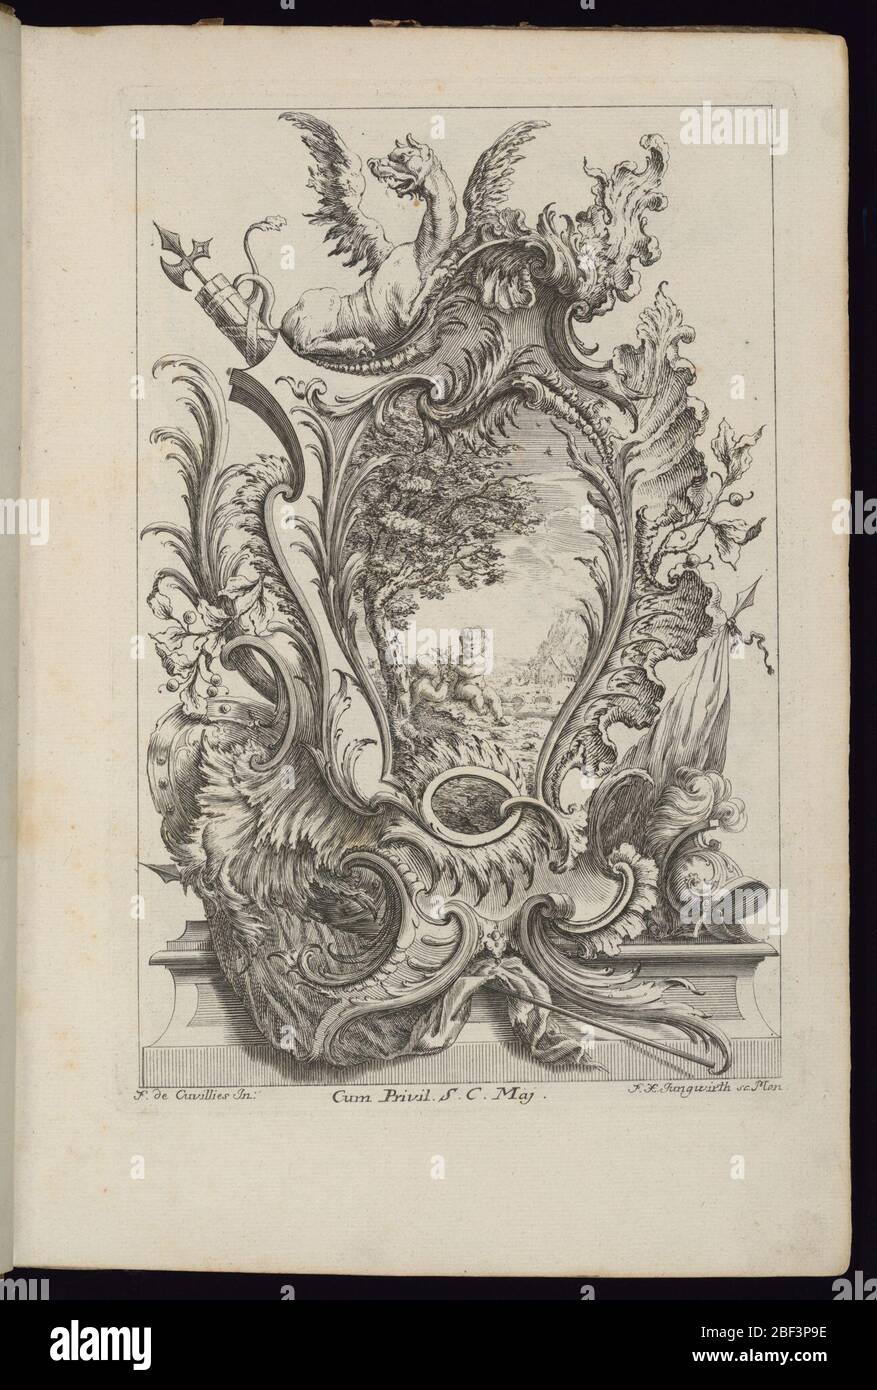 Cartouche with a Dragon and Armorial Trophy Livre de Cartouches divers usages Book of Cartouches for Different Uses. Cartouche framed with a winged dragon and battle weapons (including spear, helmet, ax, shield). Within cartouche, a figural scene in Rococo style depicting two putti in a field below a tree--a town or village in background. Stock Photo